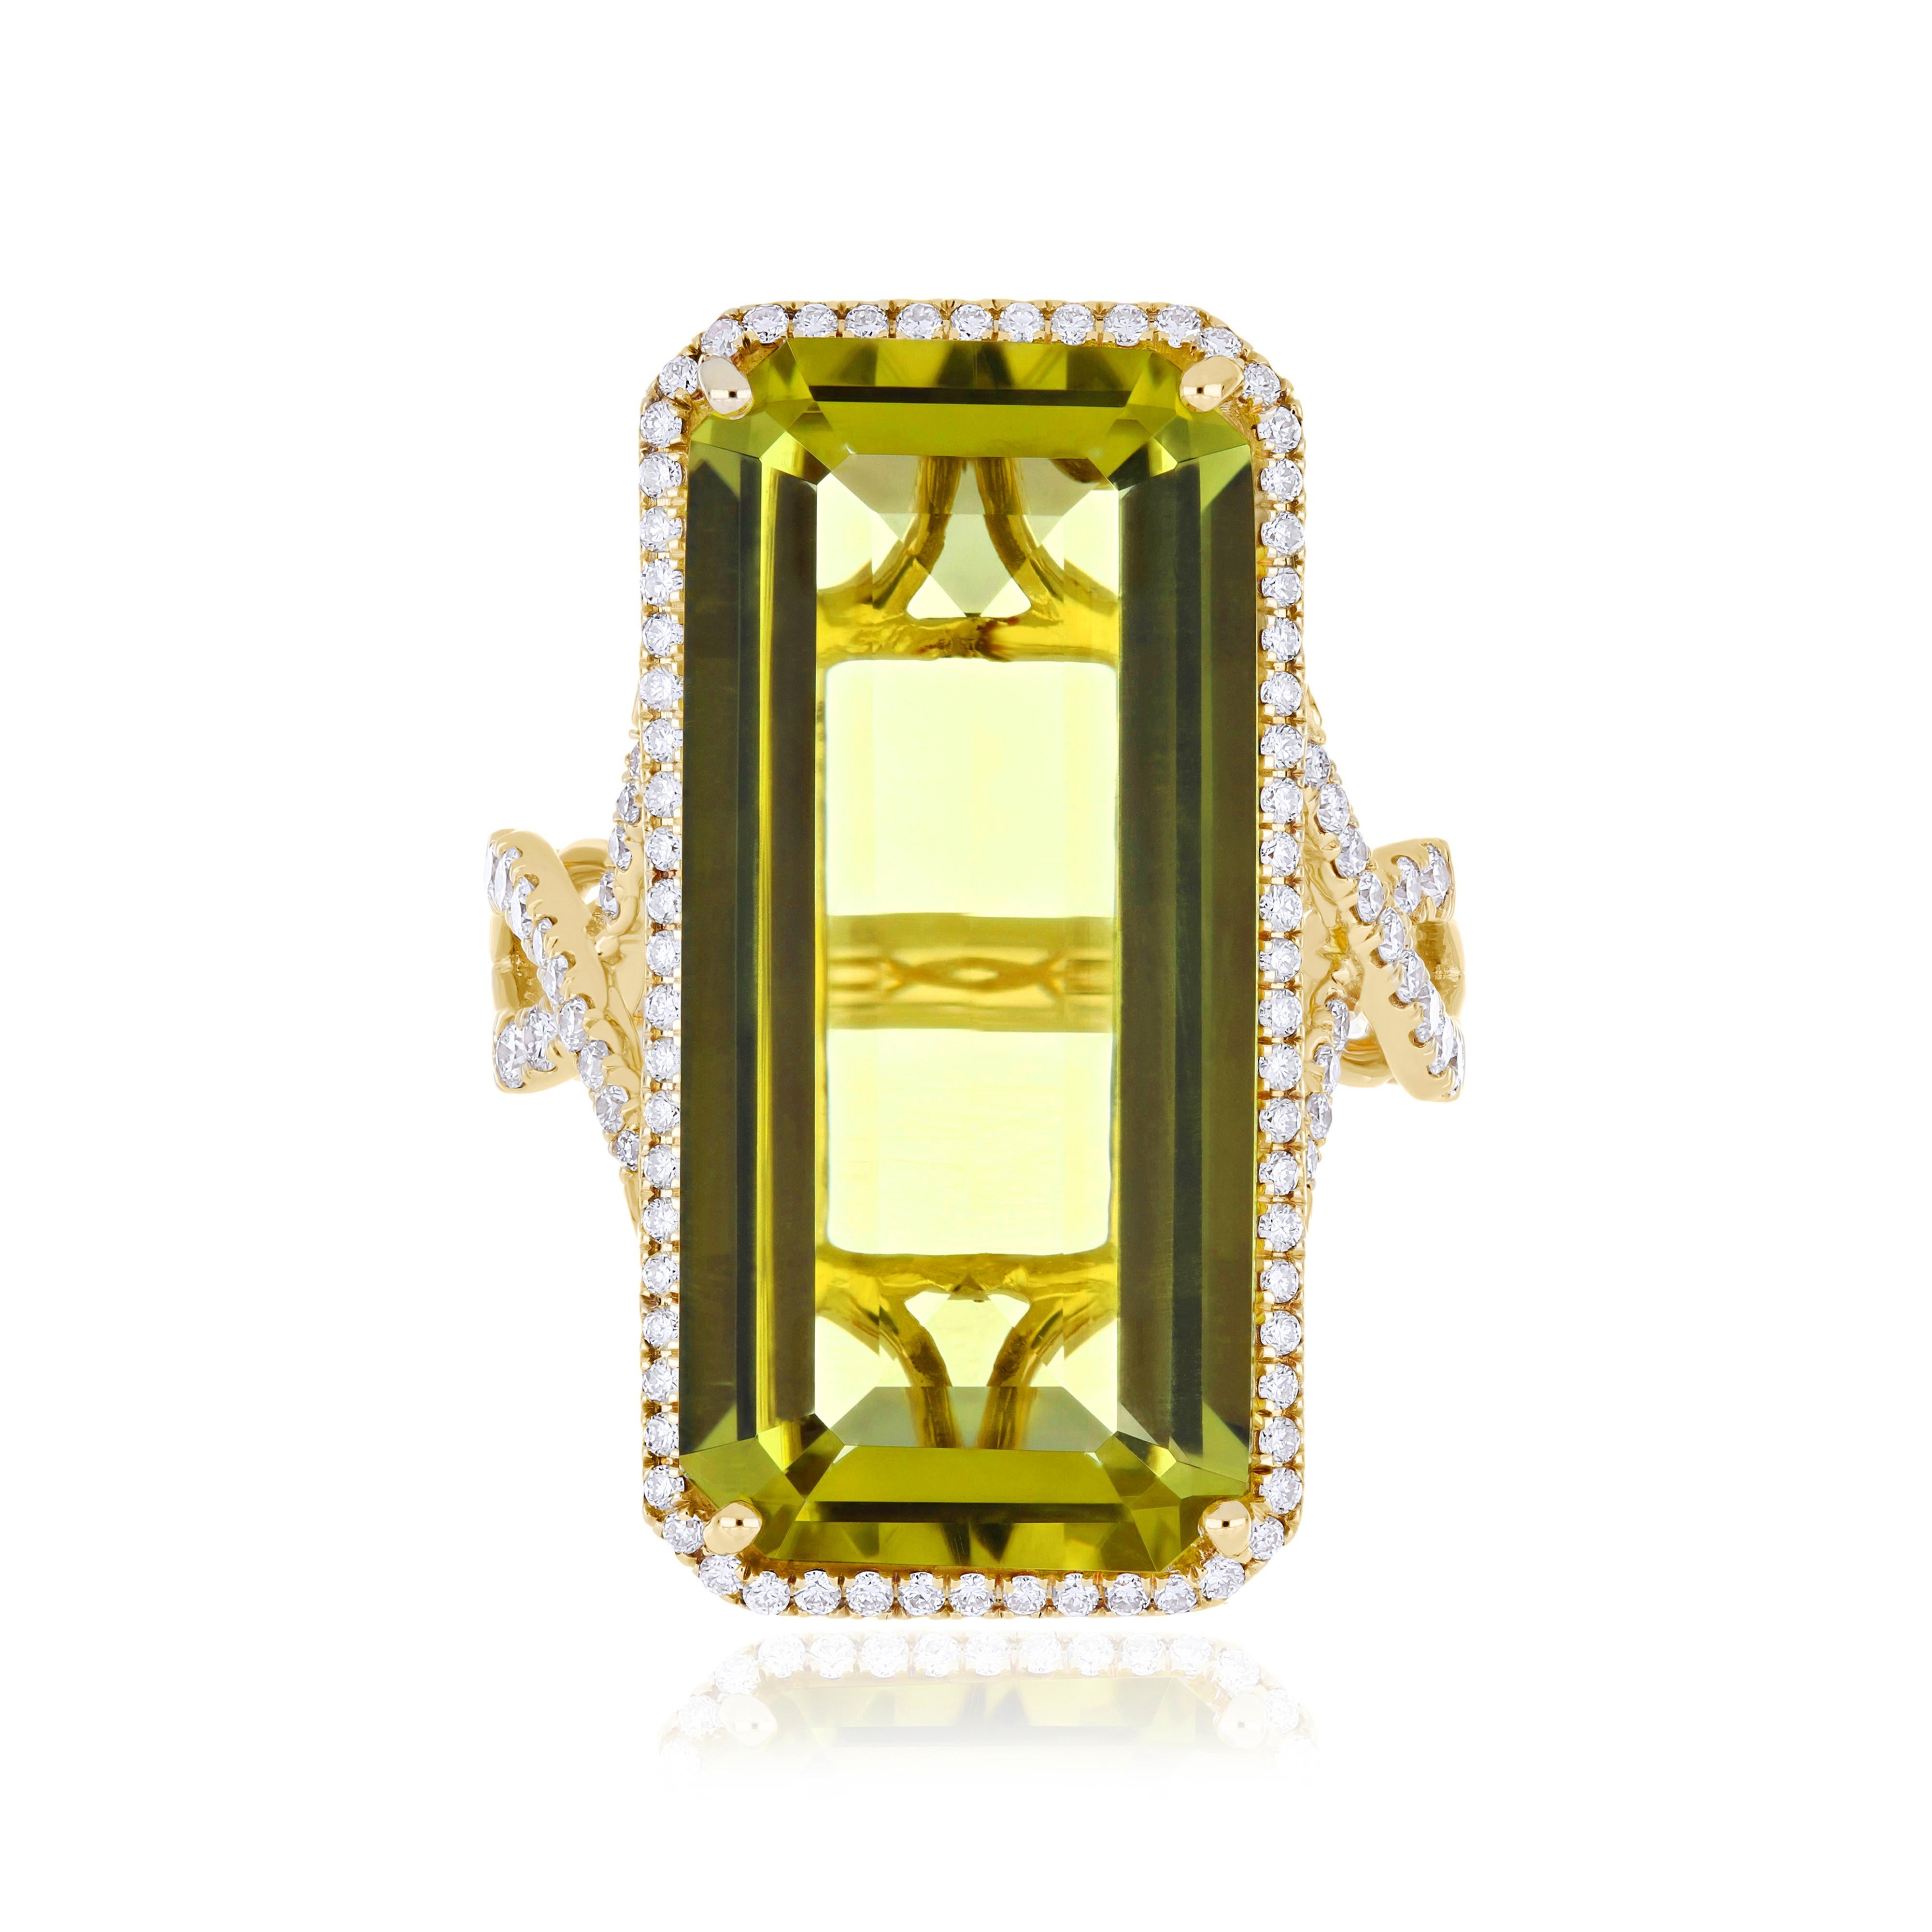 For Sale:  18.35cts Lemon Citrine and Diamond 14 Karat Yellow Gold Ring for New Year Gift  8